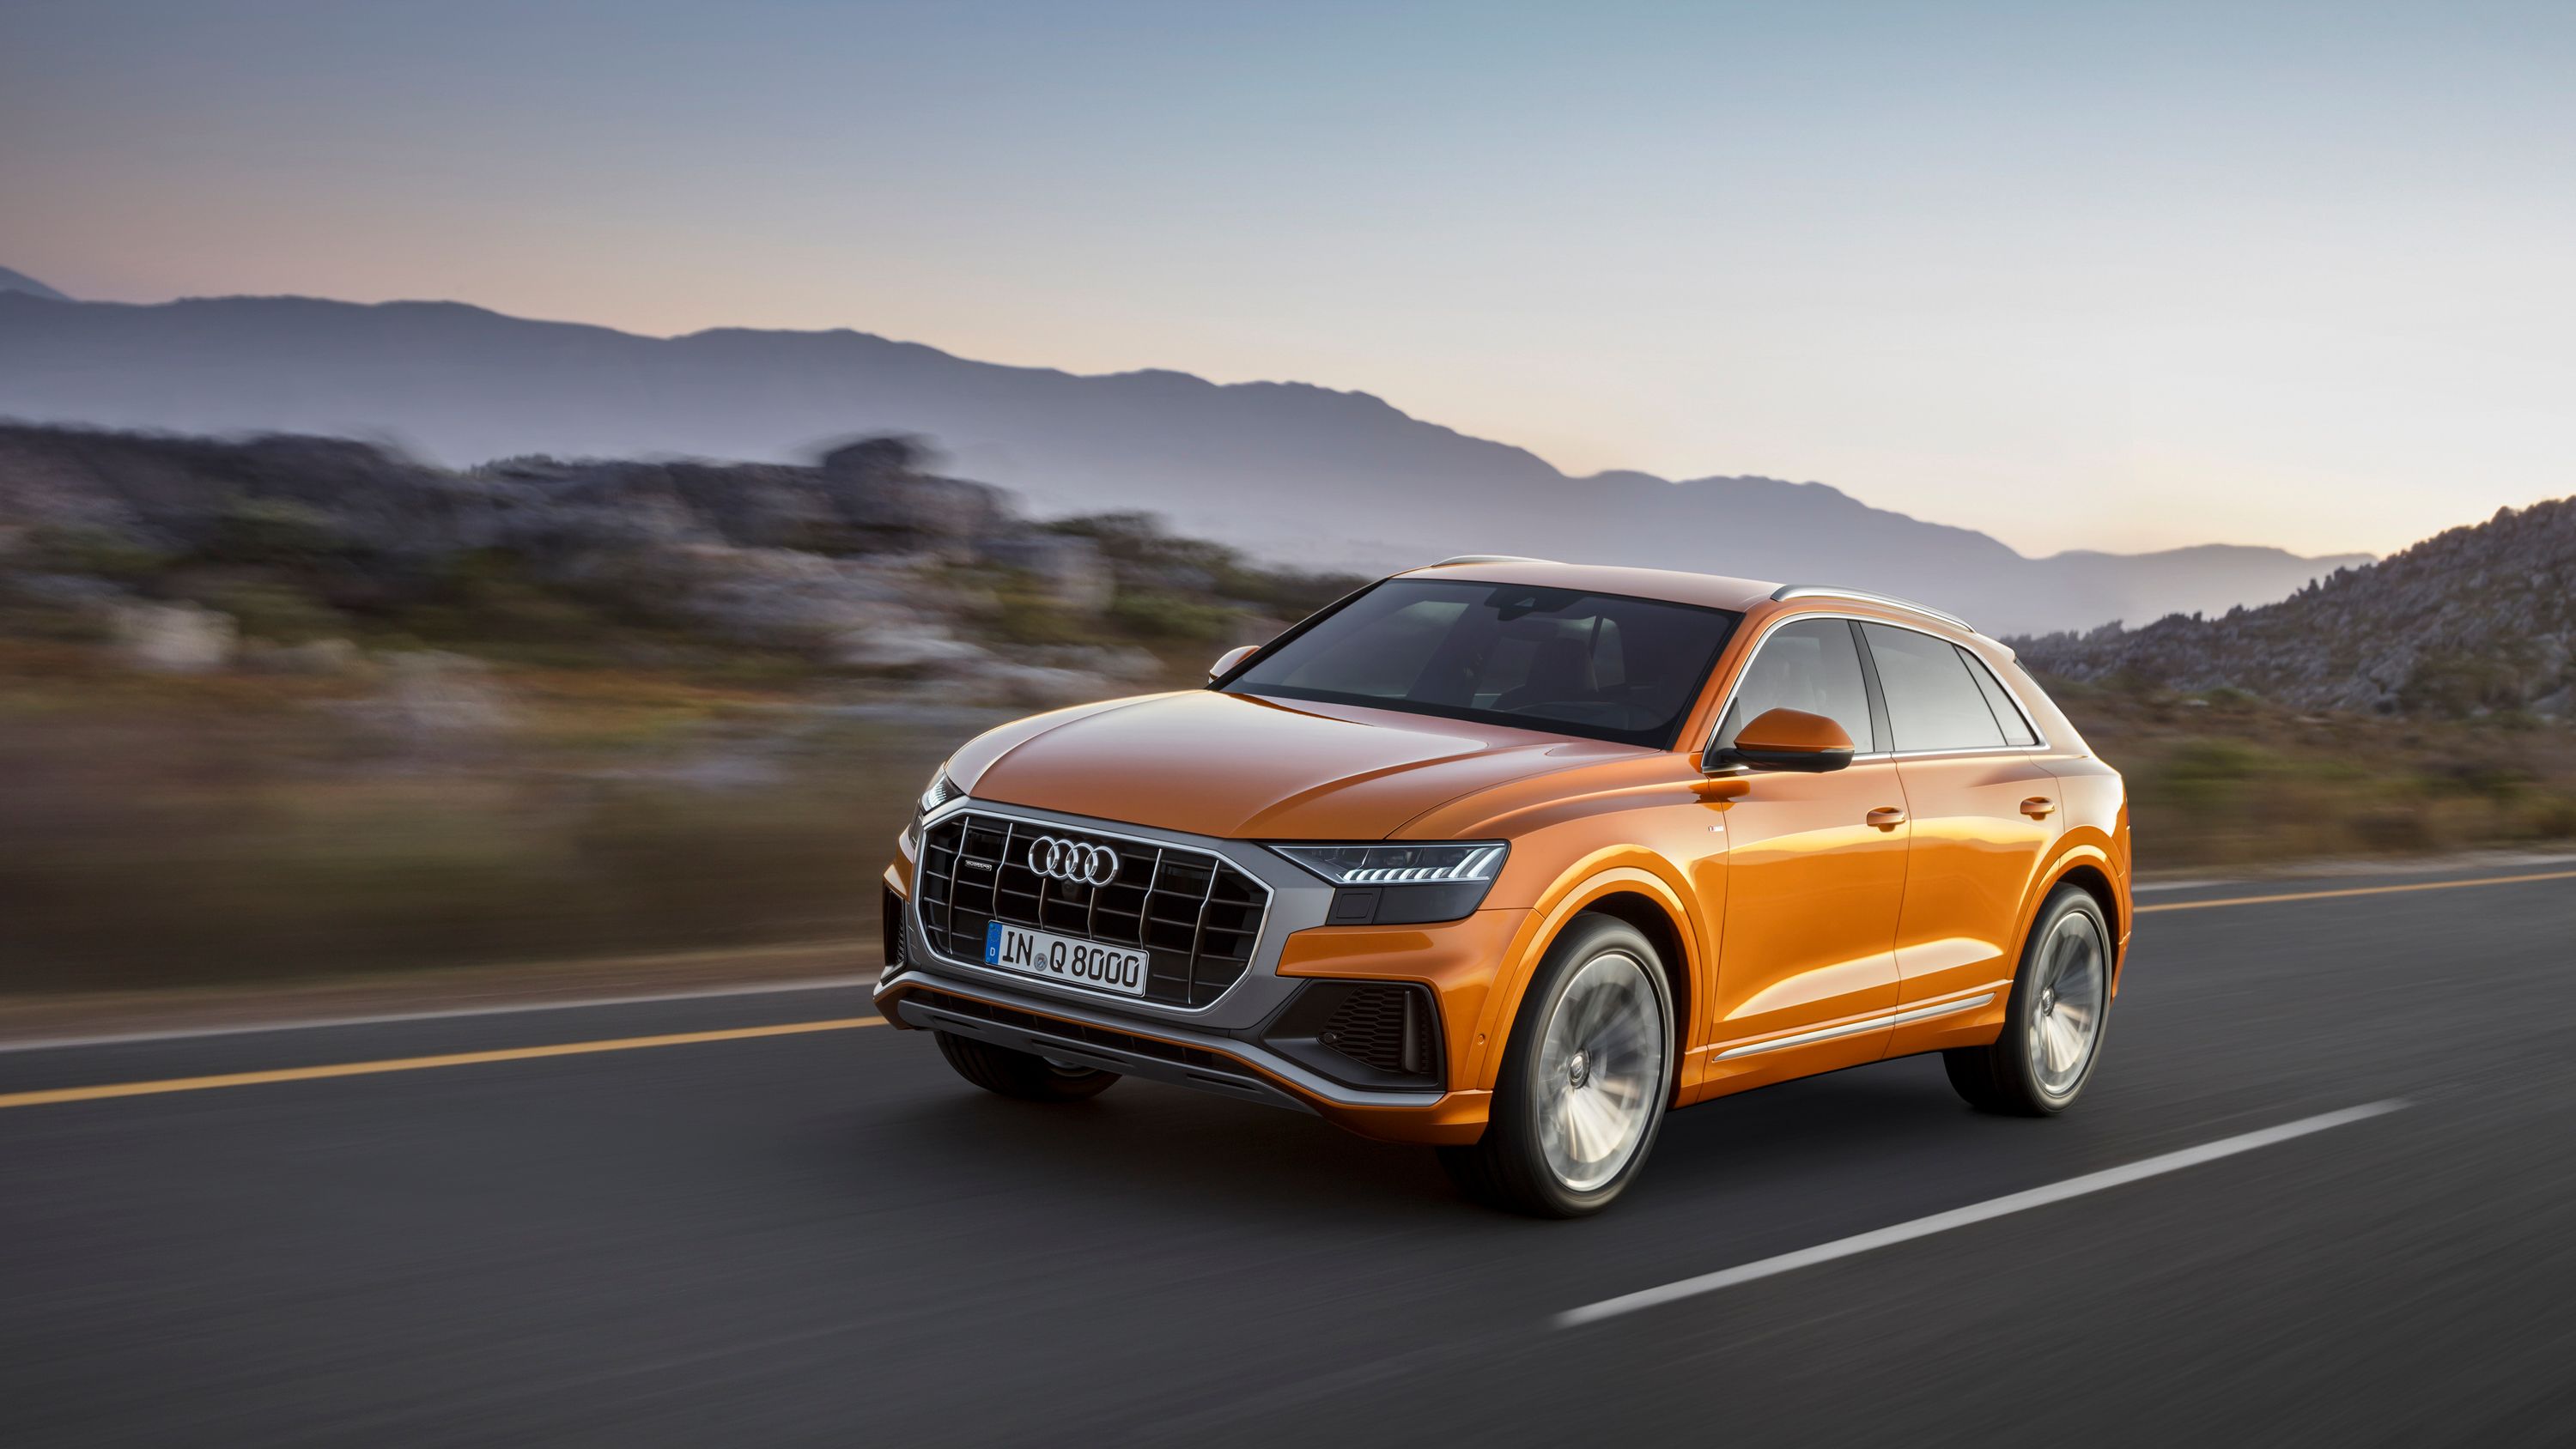 2019 Audi Q8: What No One Is Talking About